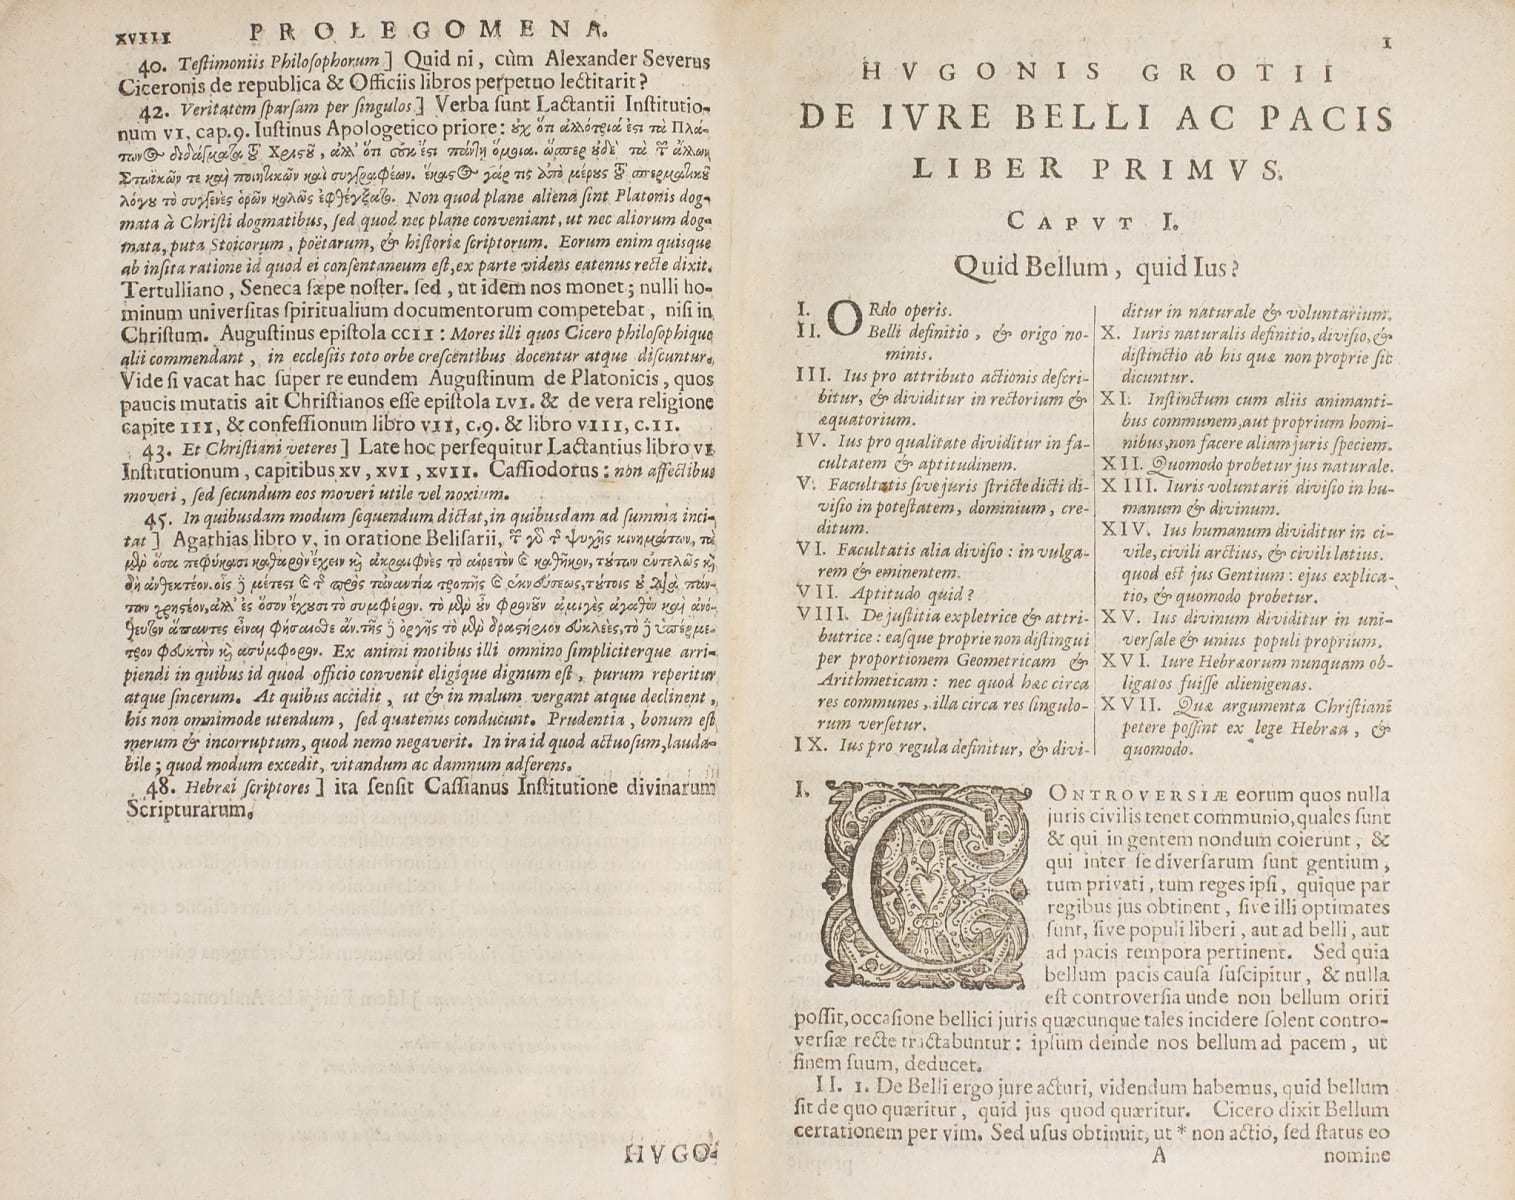 Two-page book spread in Latin. Links to larger version of this image.